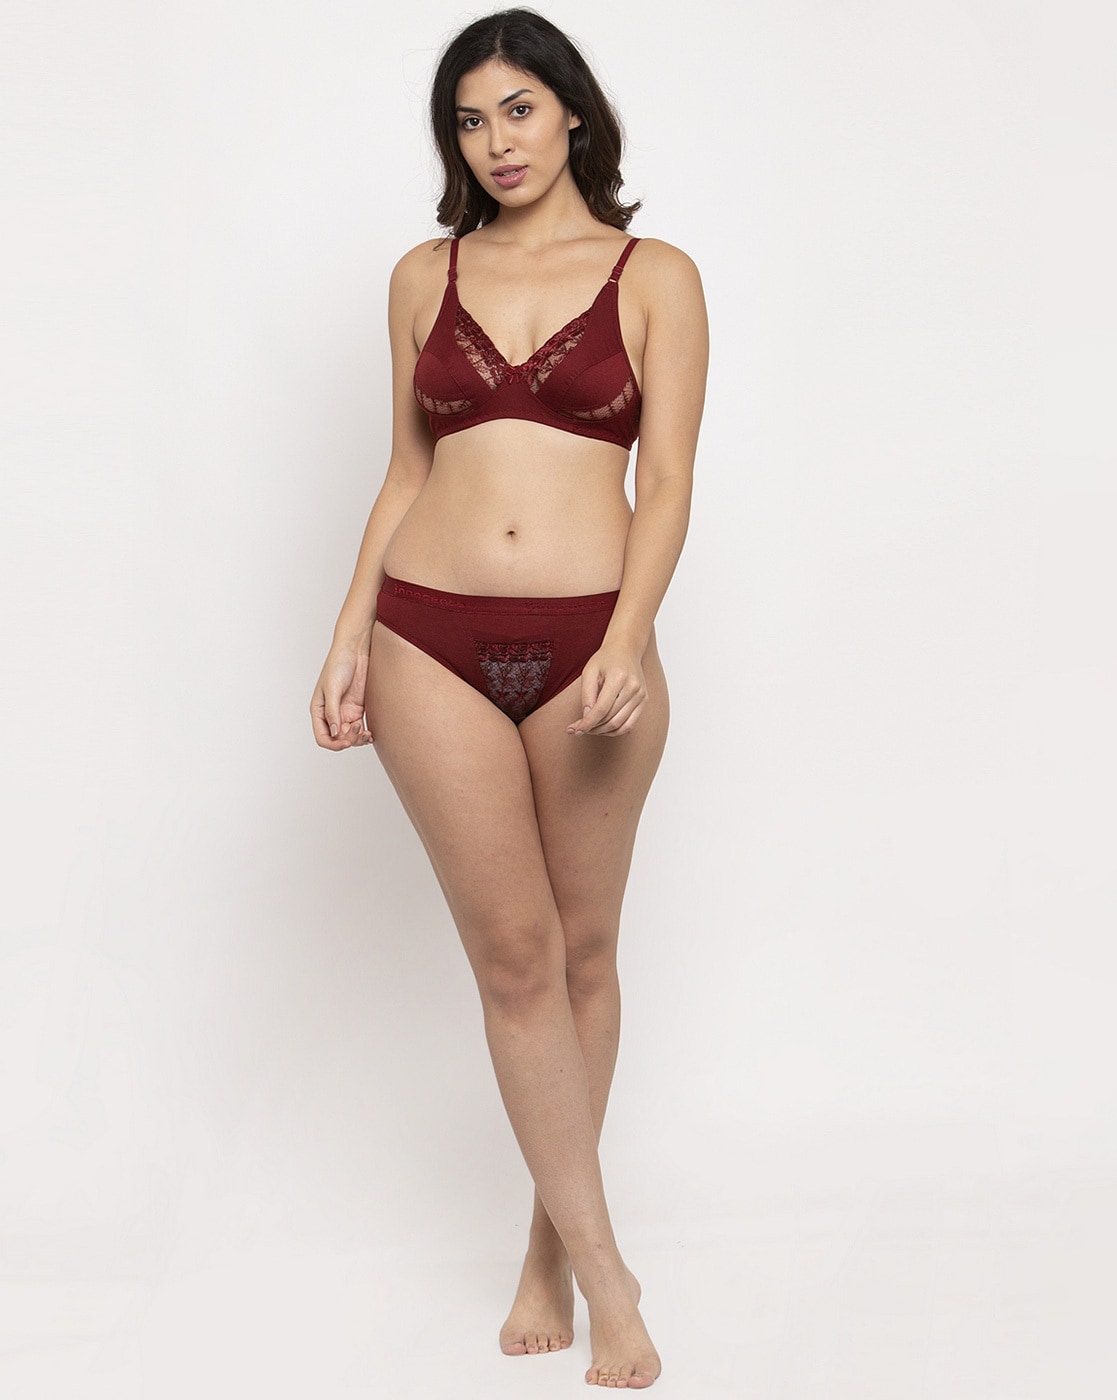 Purchase Wholesale bra and panty sets. Free Returns & Net 60 Terms on Faire